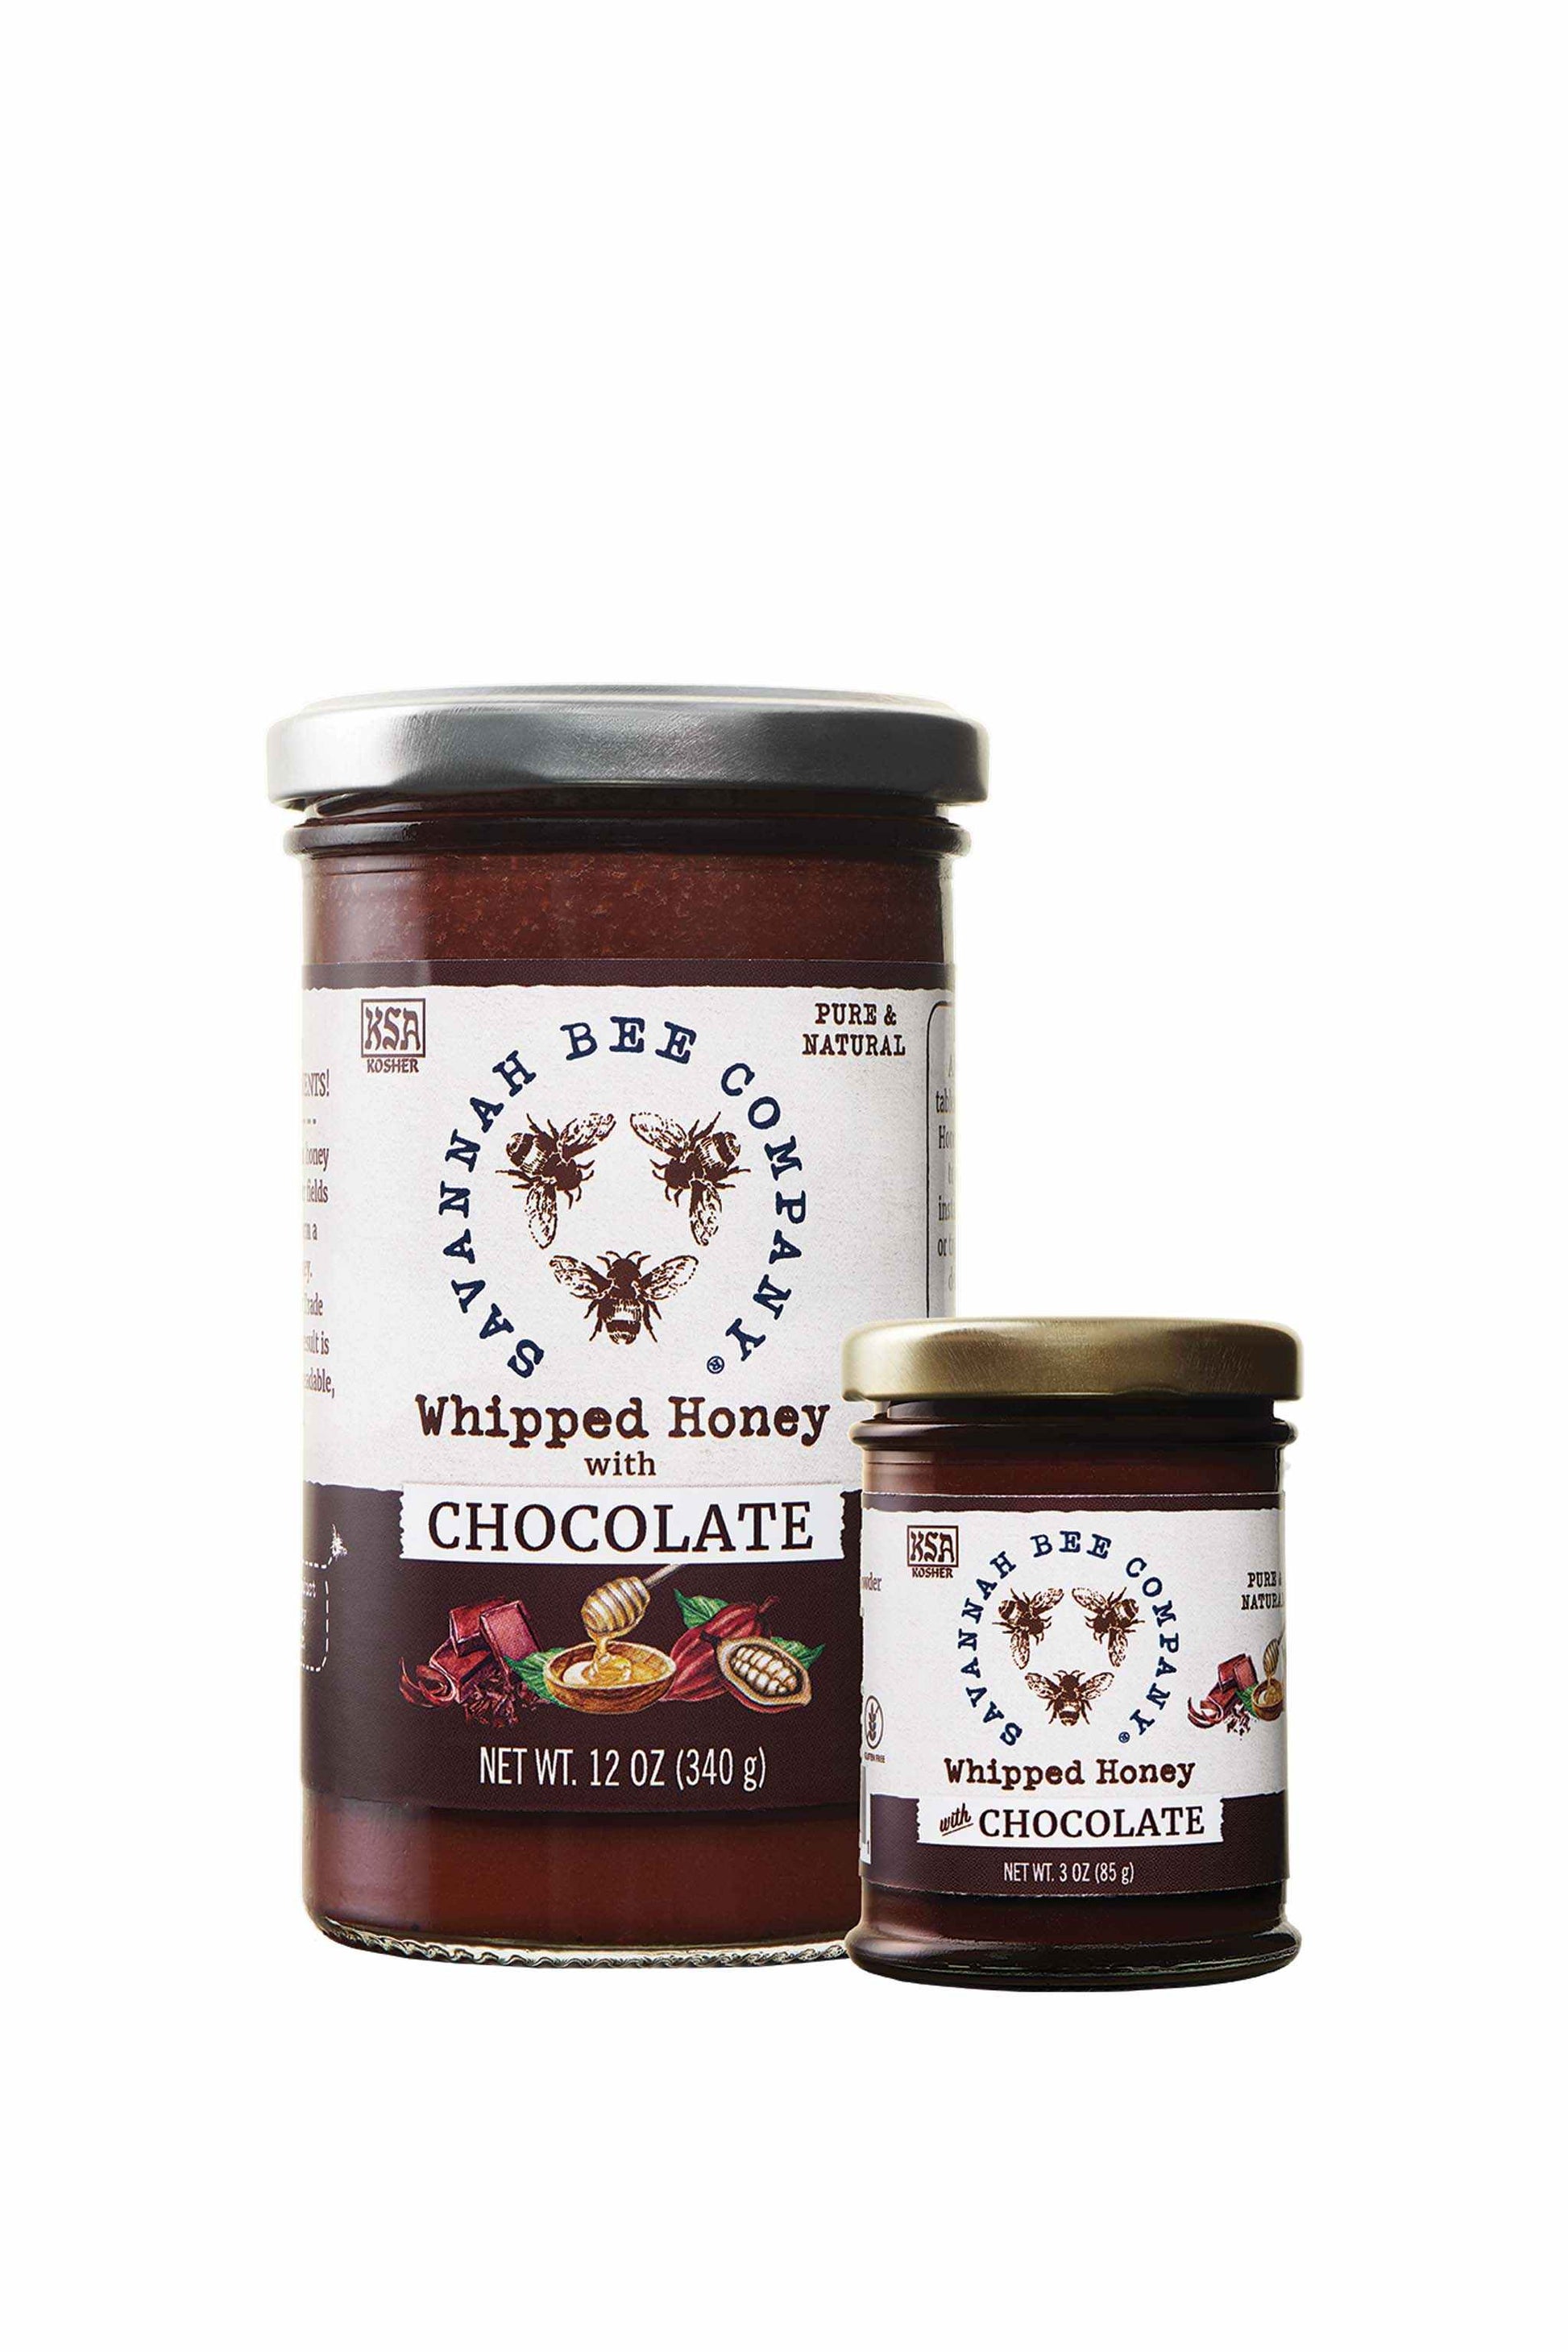 Whipped Honey with Chocolate 12 oz. and 3 oz. 